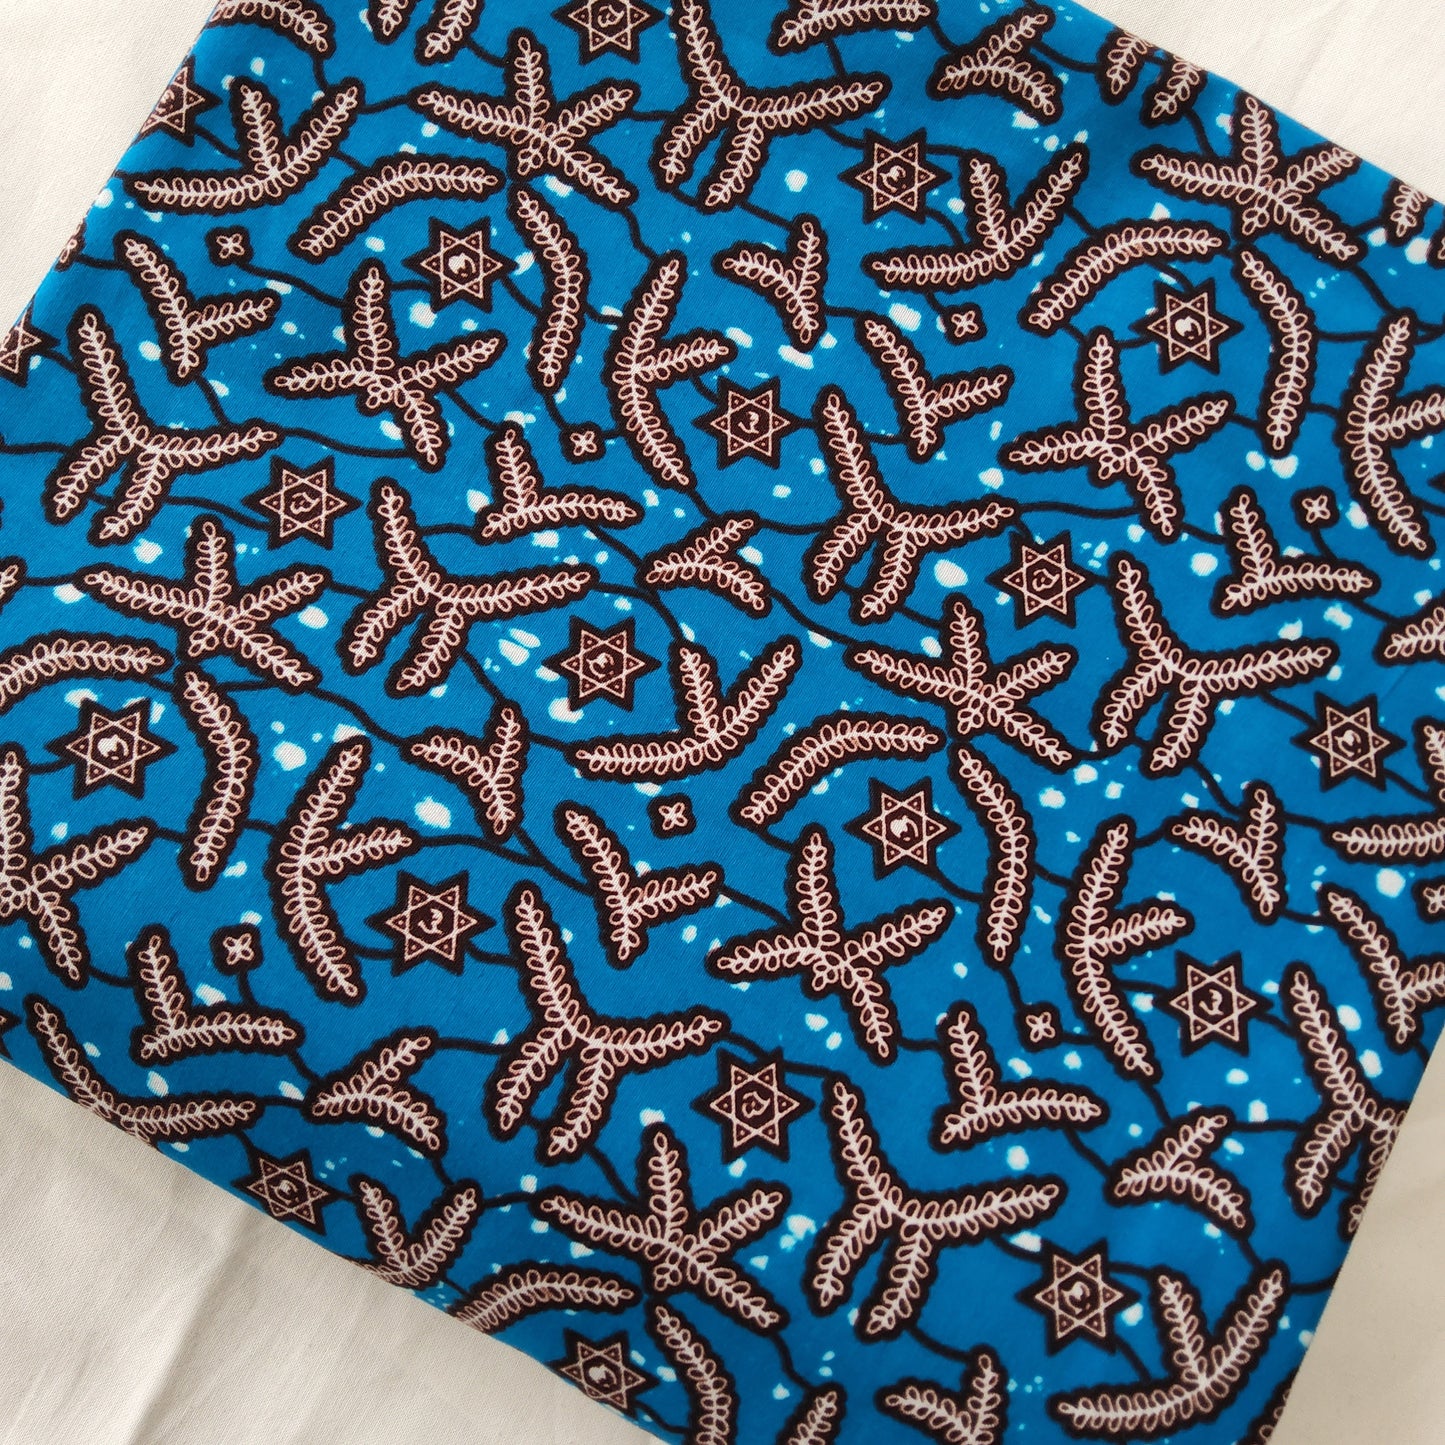 REINVENTED CLASSIC PATTERN AFRICAN WAX BLOCK PRINT FABRIC -6 YARDS BUNDLE